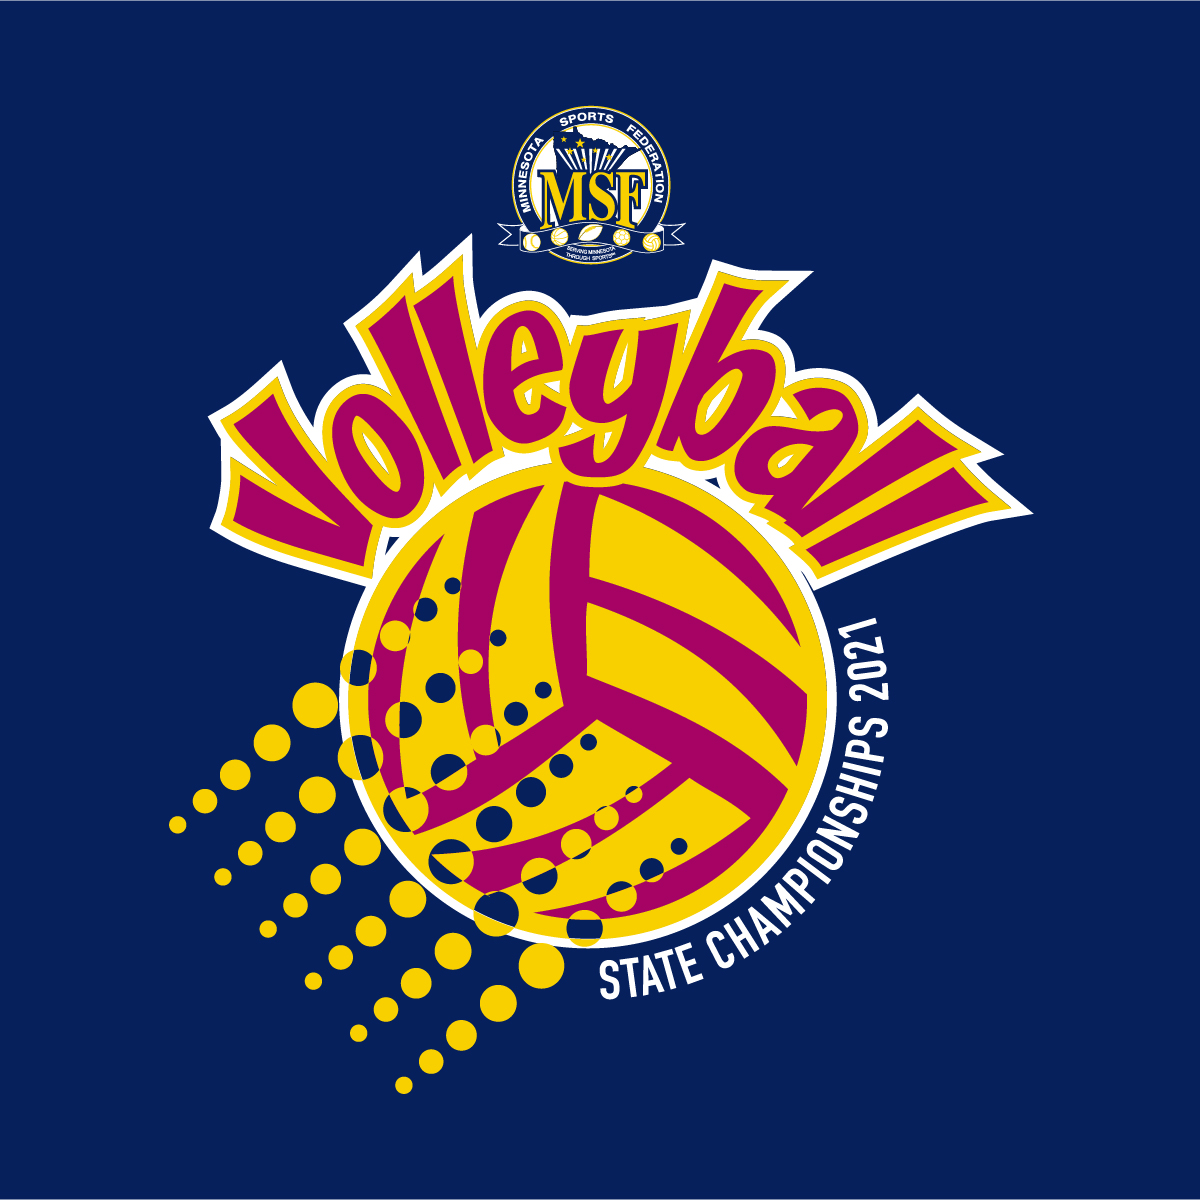 2021 BECKER YVB Tournament Information, Schedules, Packets and Brackets